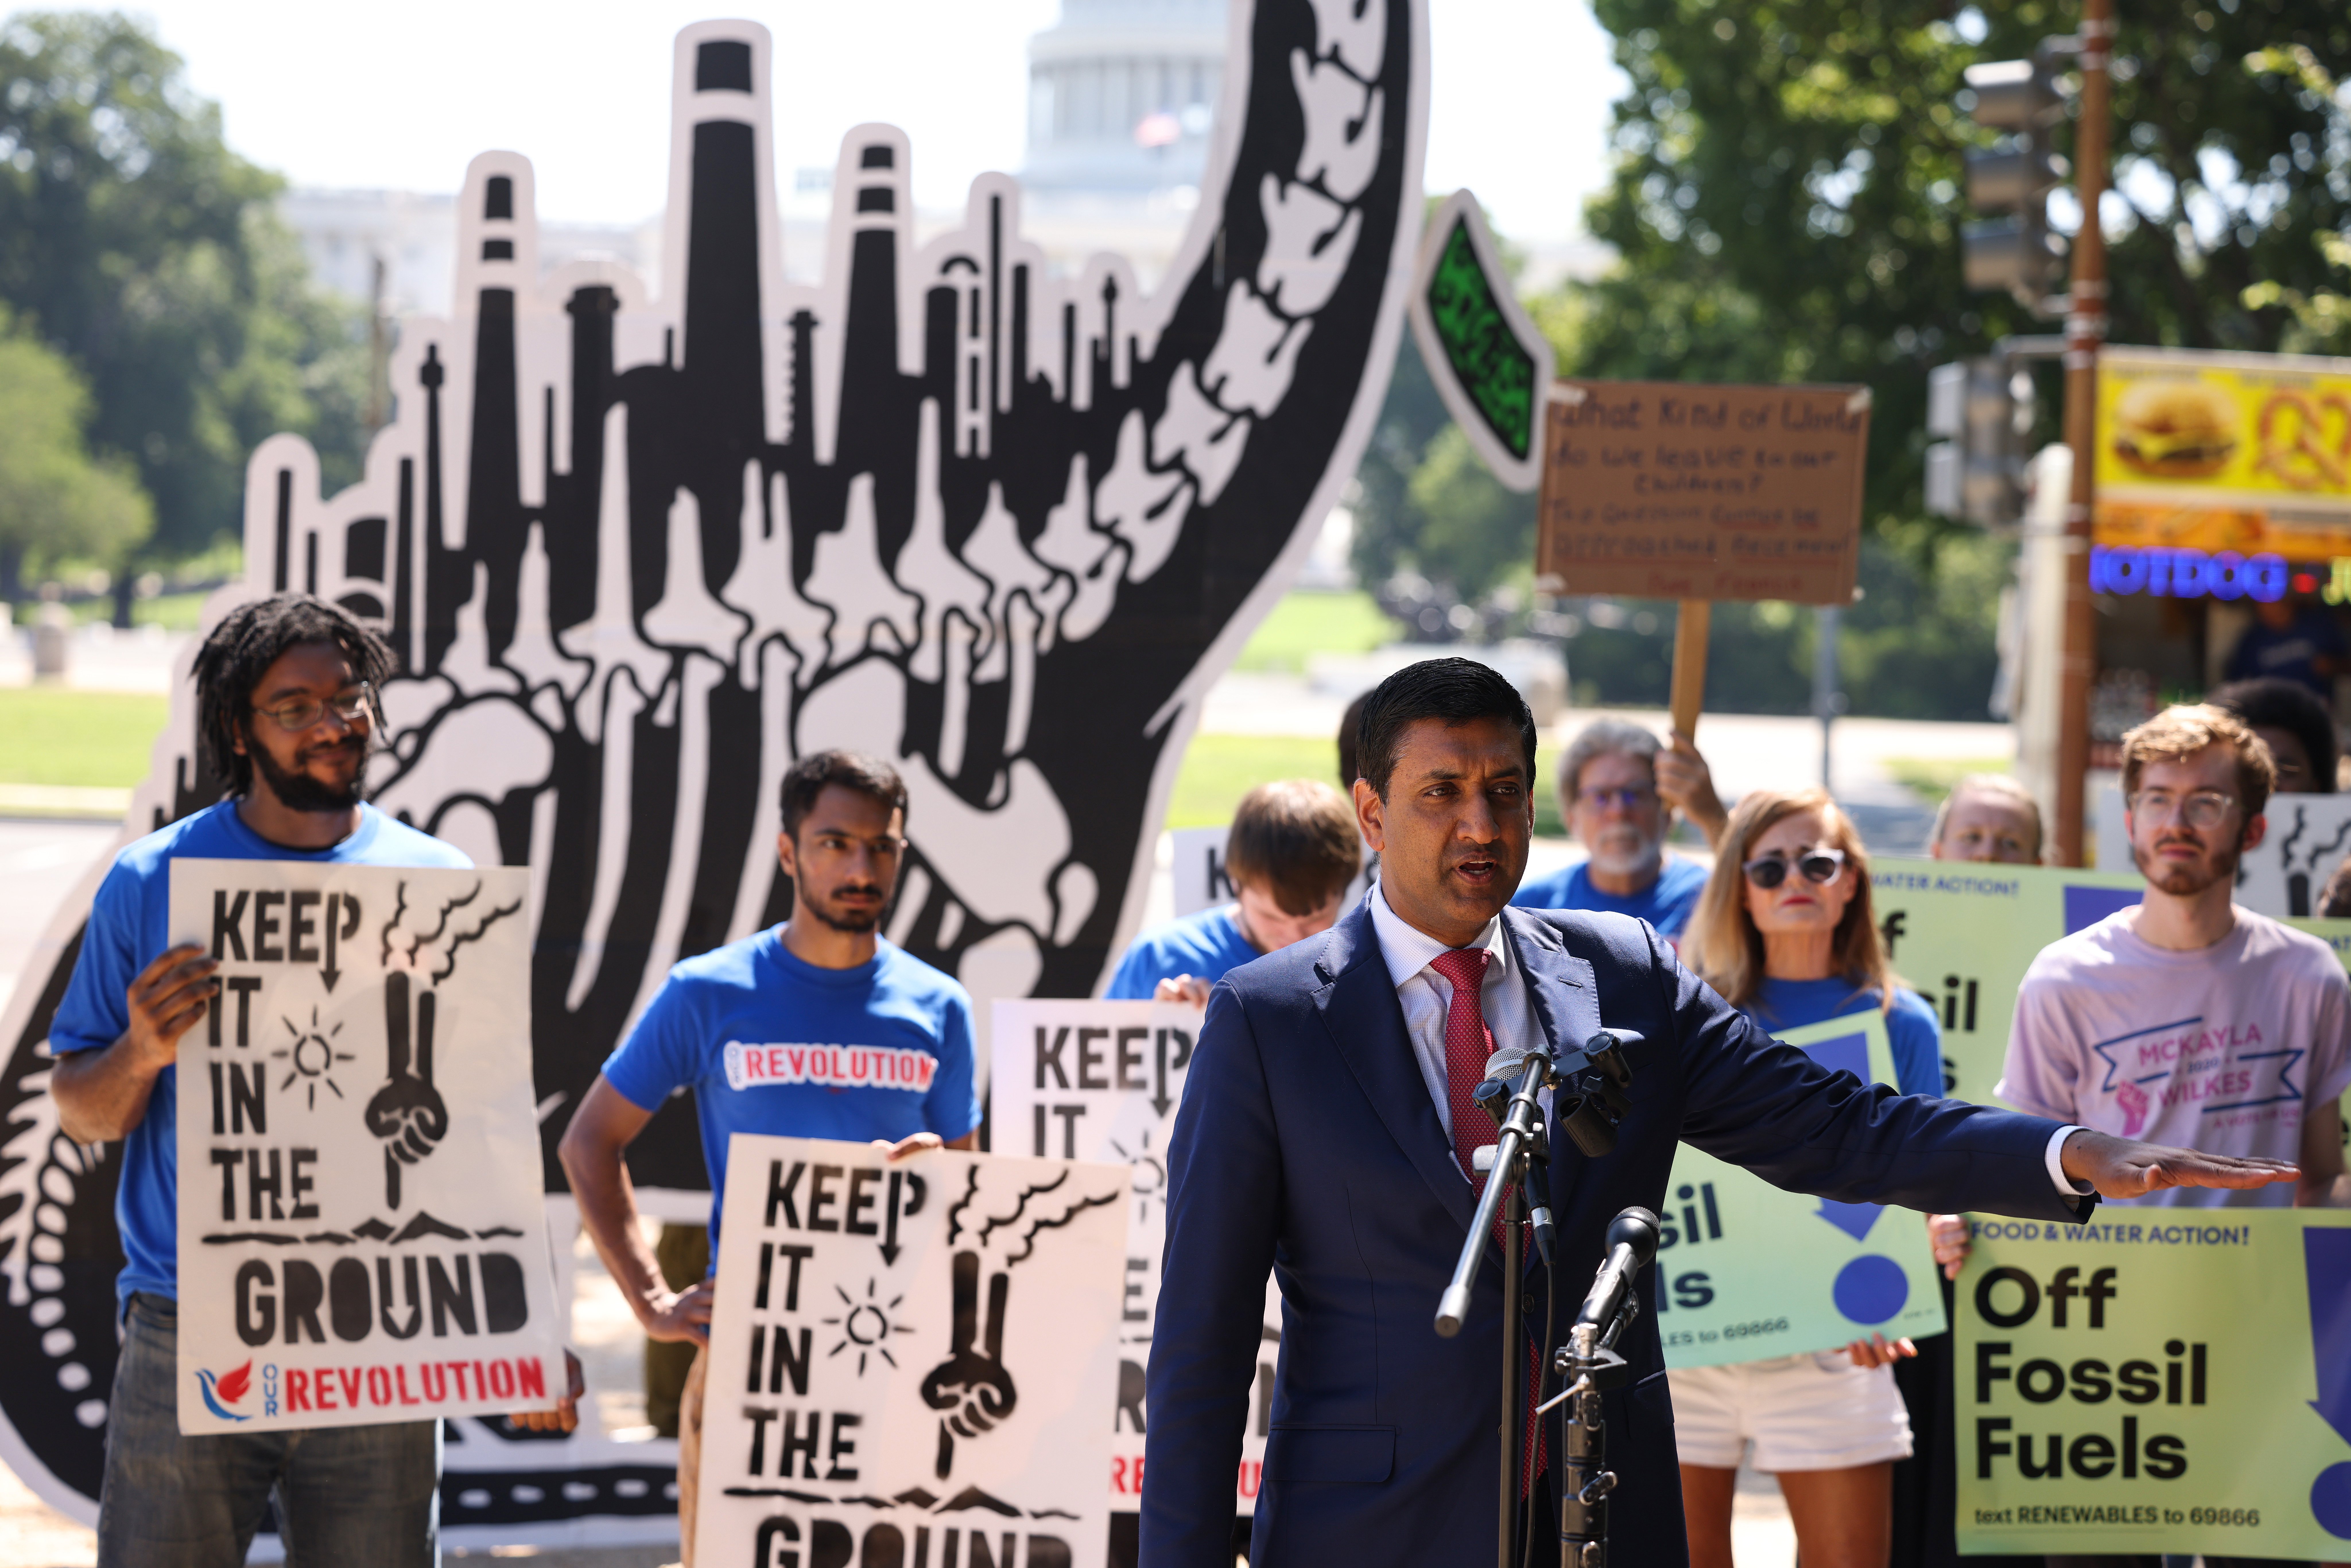 Democratic California Rep. Ro Khanna speaks at an “End Fossil Fuel” rally near the Capitol on June 29. (Anna Moneymaker/Getty Images)